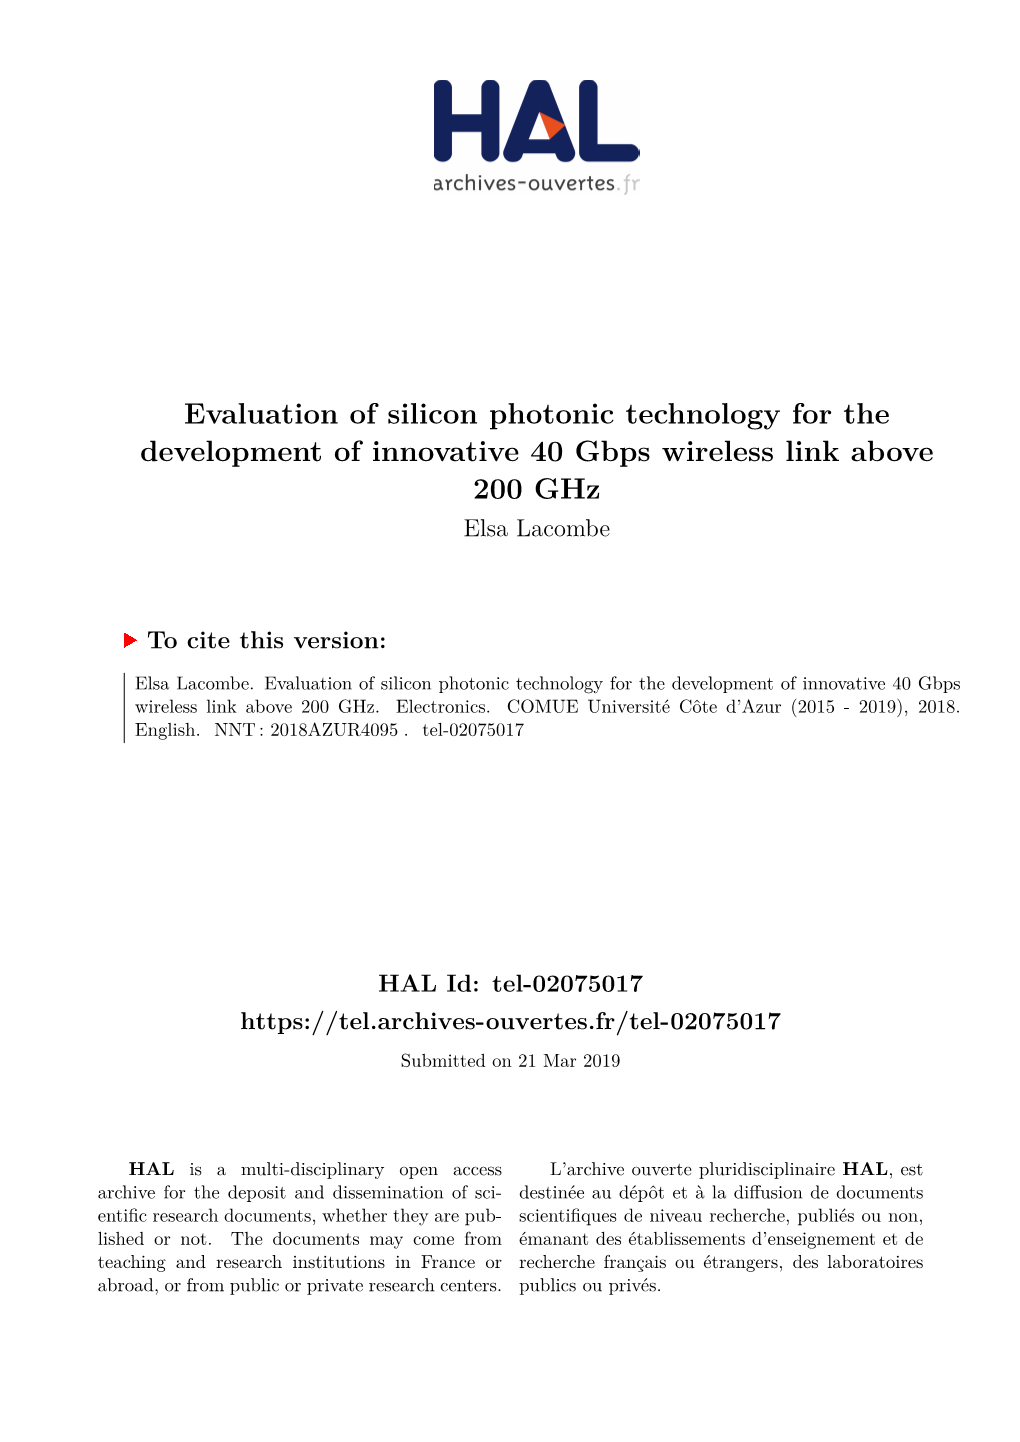 Evaluation of Silicon Photonic Technology for the Development of Innovative 40 Gbps Wireless Link Above 200 Ghz Elsa Lacombe